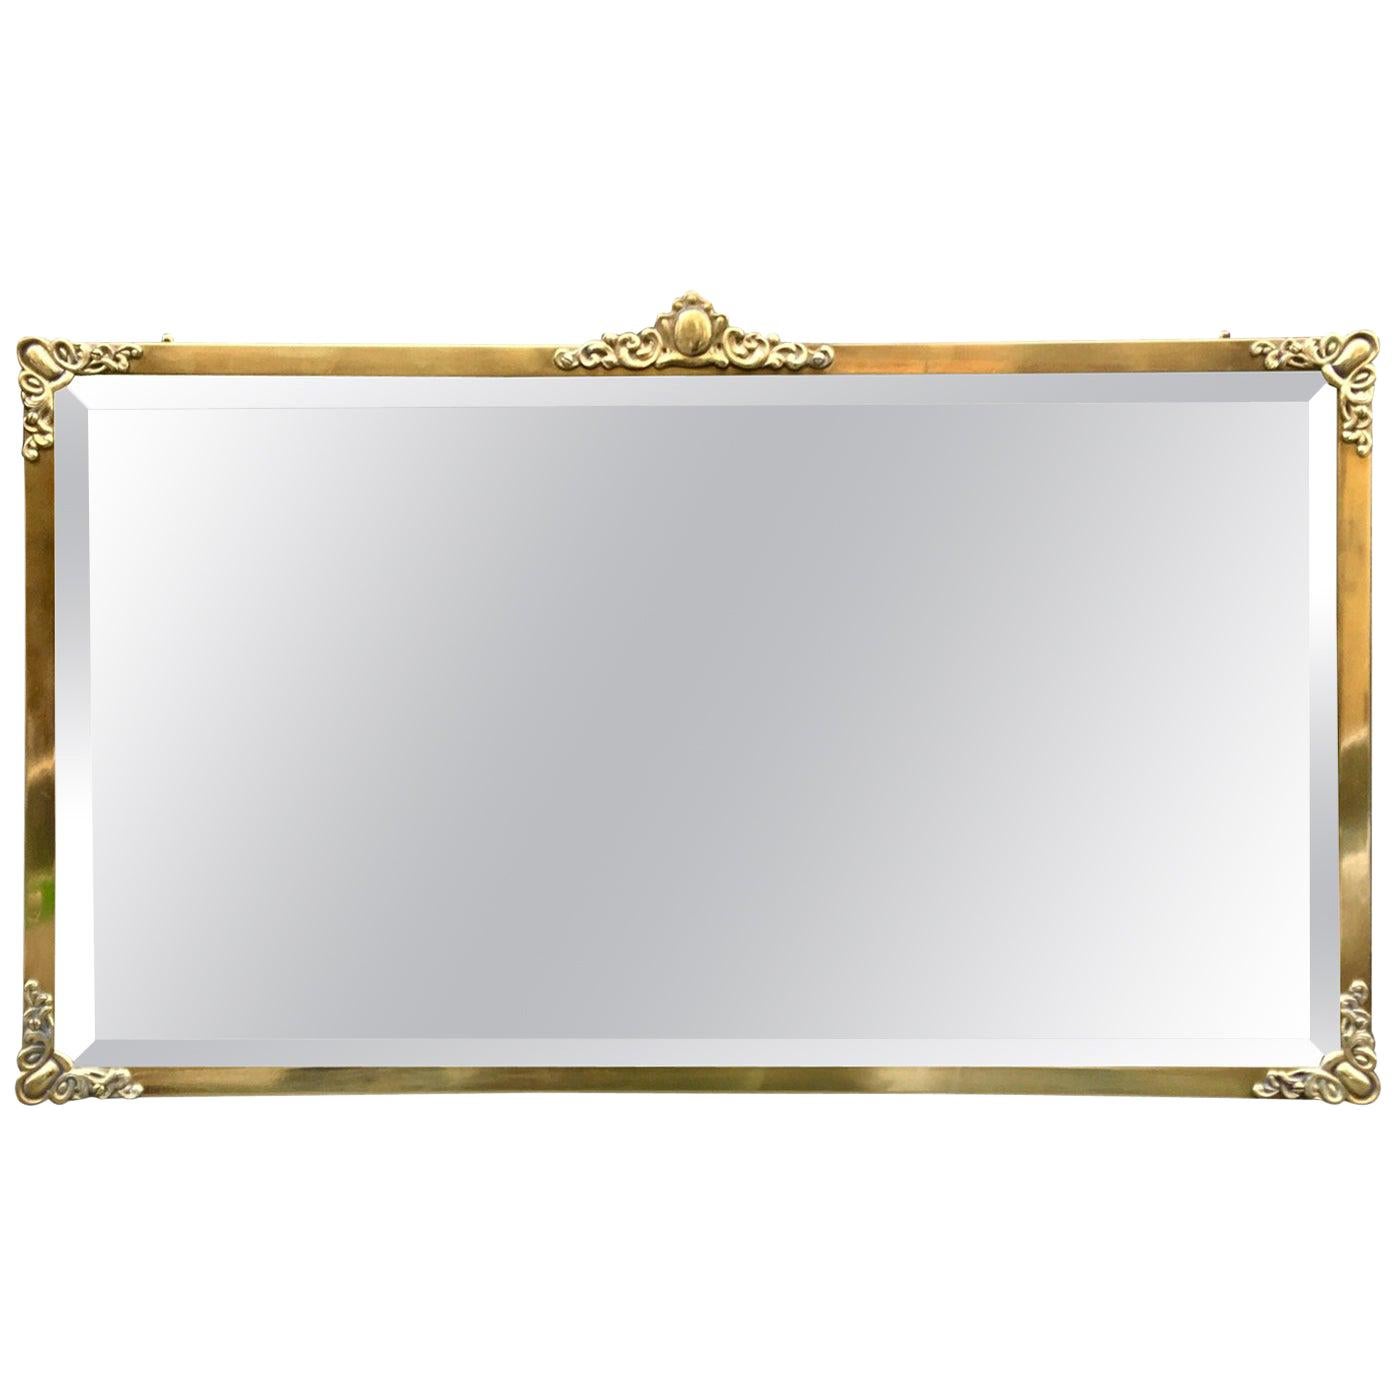 Rectangular Art Nouveau Mirror with Brass Frame and Friezes, Early 1900